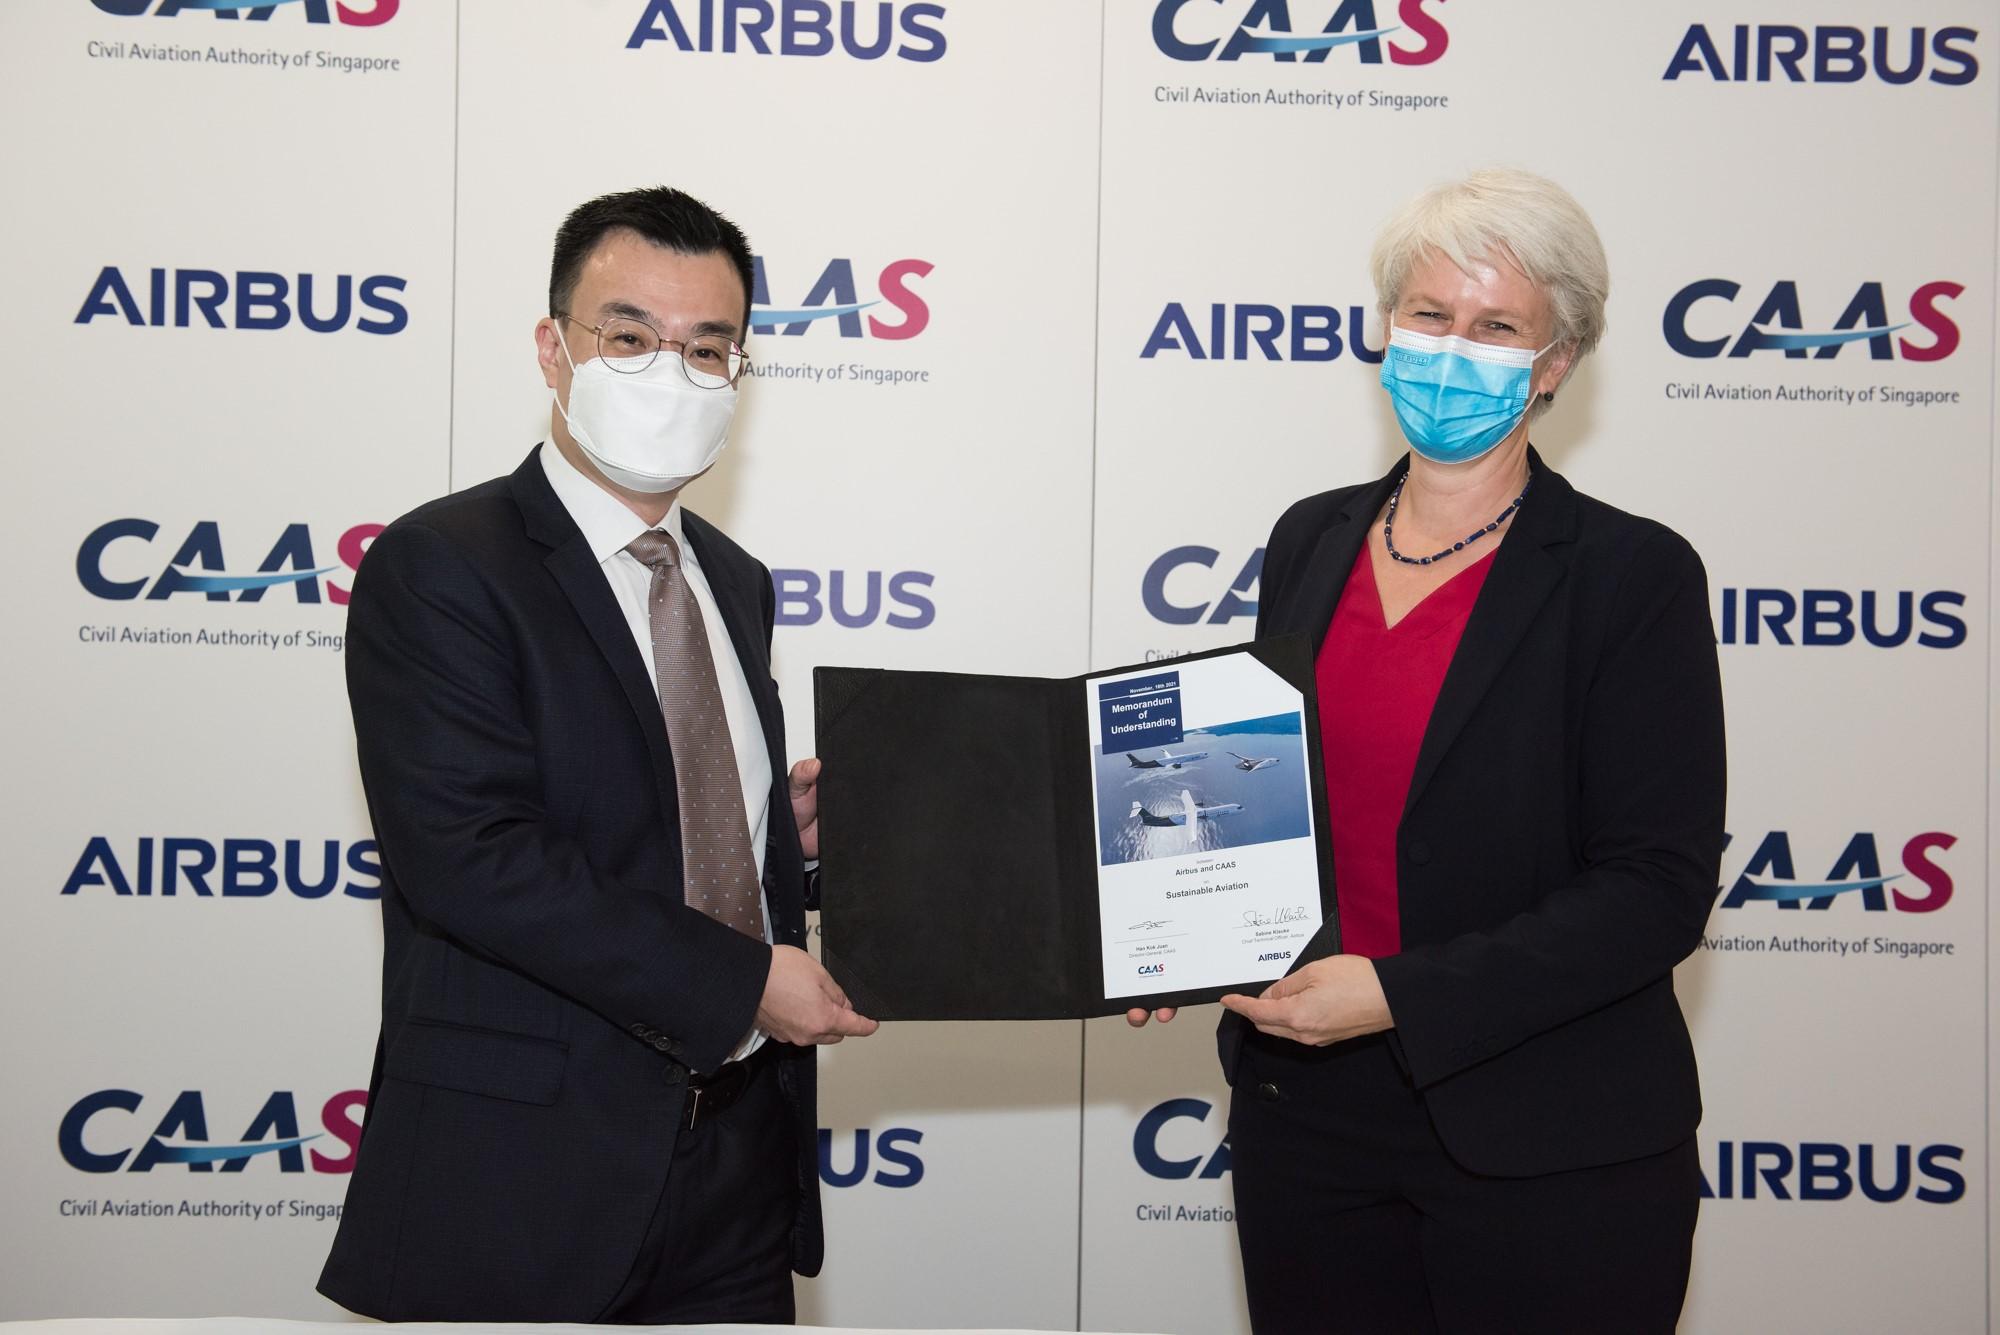 CAAS and Airbus collaborate